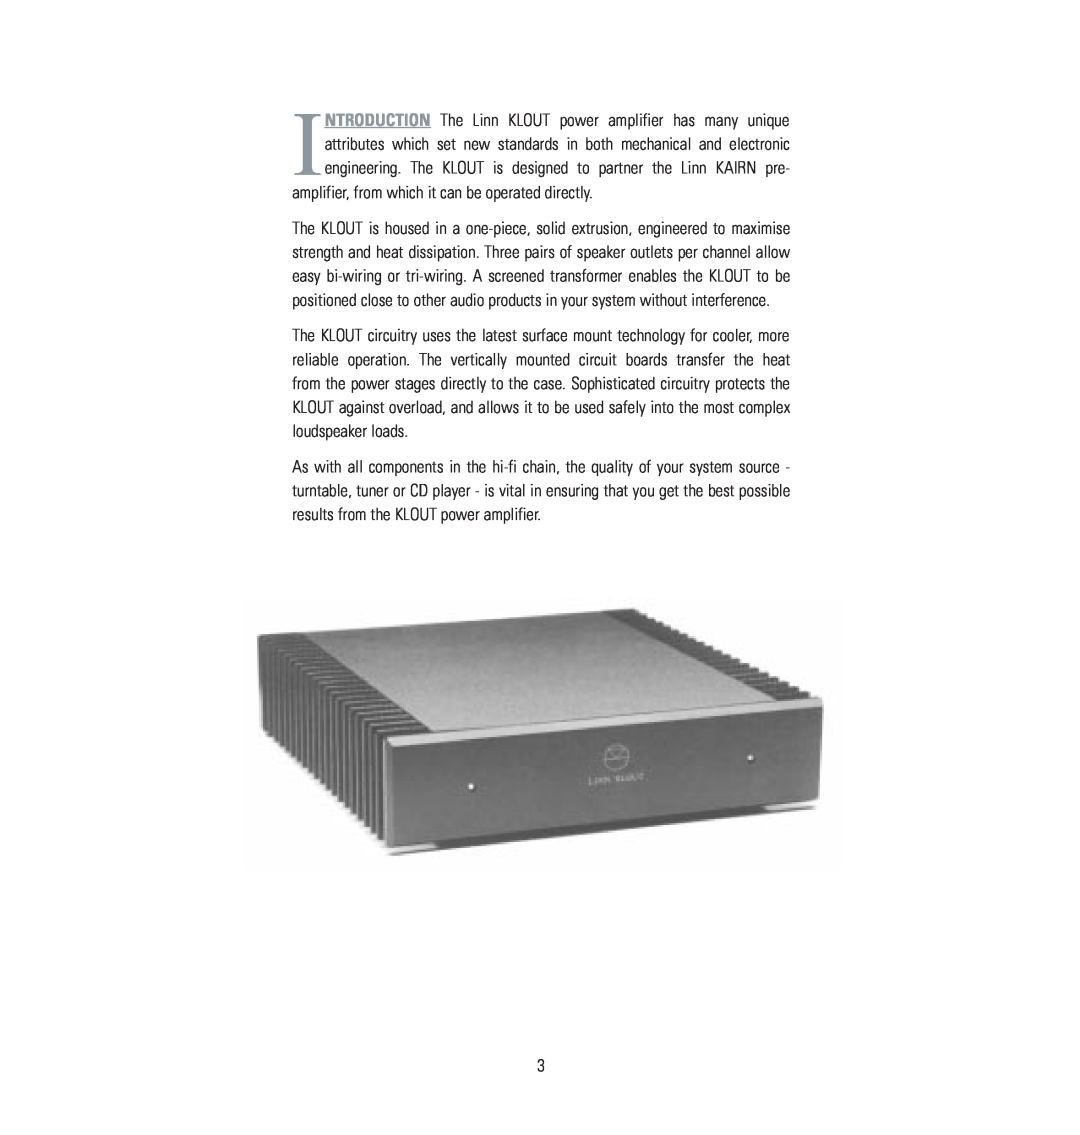 Linn Klout owner manual amplifier, from which it can be operated directly 